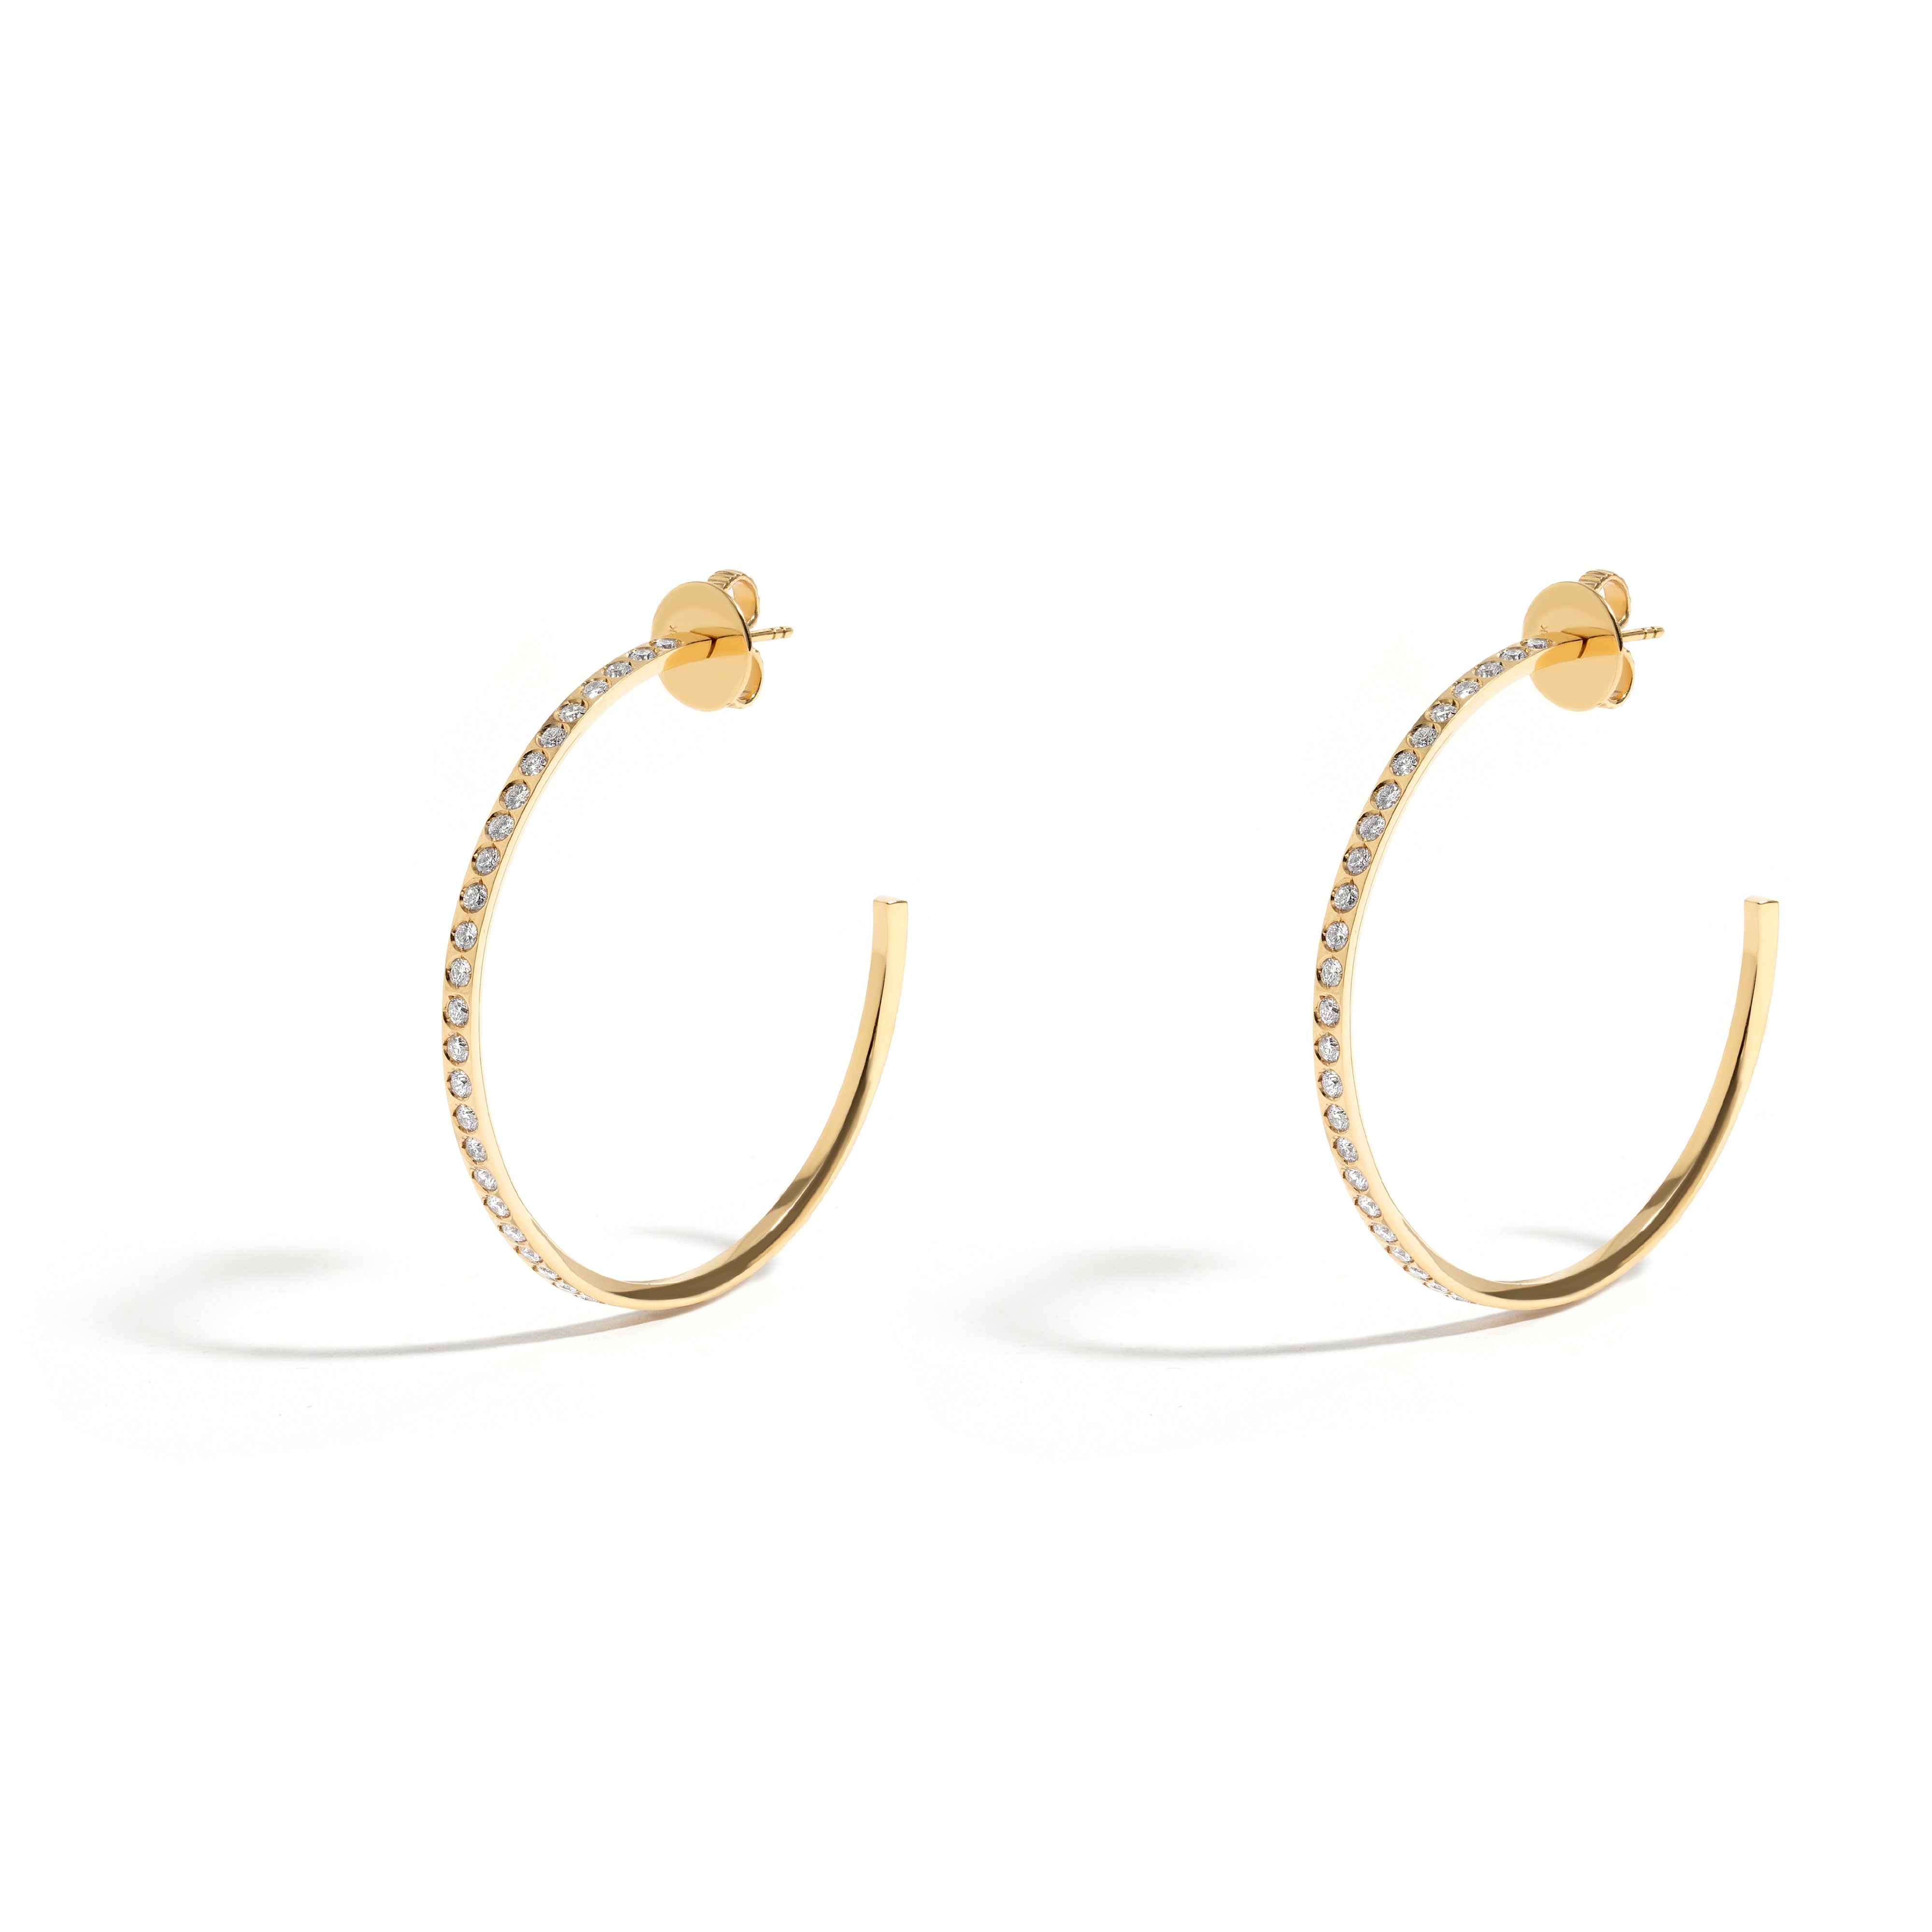 NEW VINTAGE POWER LARGE HOOP EARRING IN 18K YELLOW GOLD WITH DIAMOND